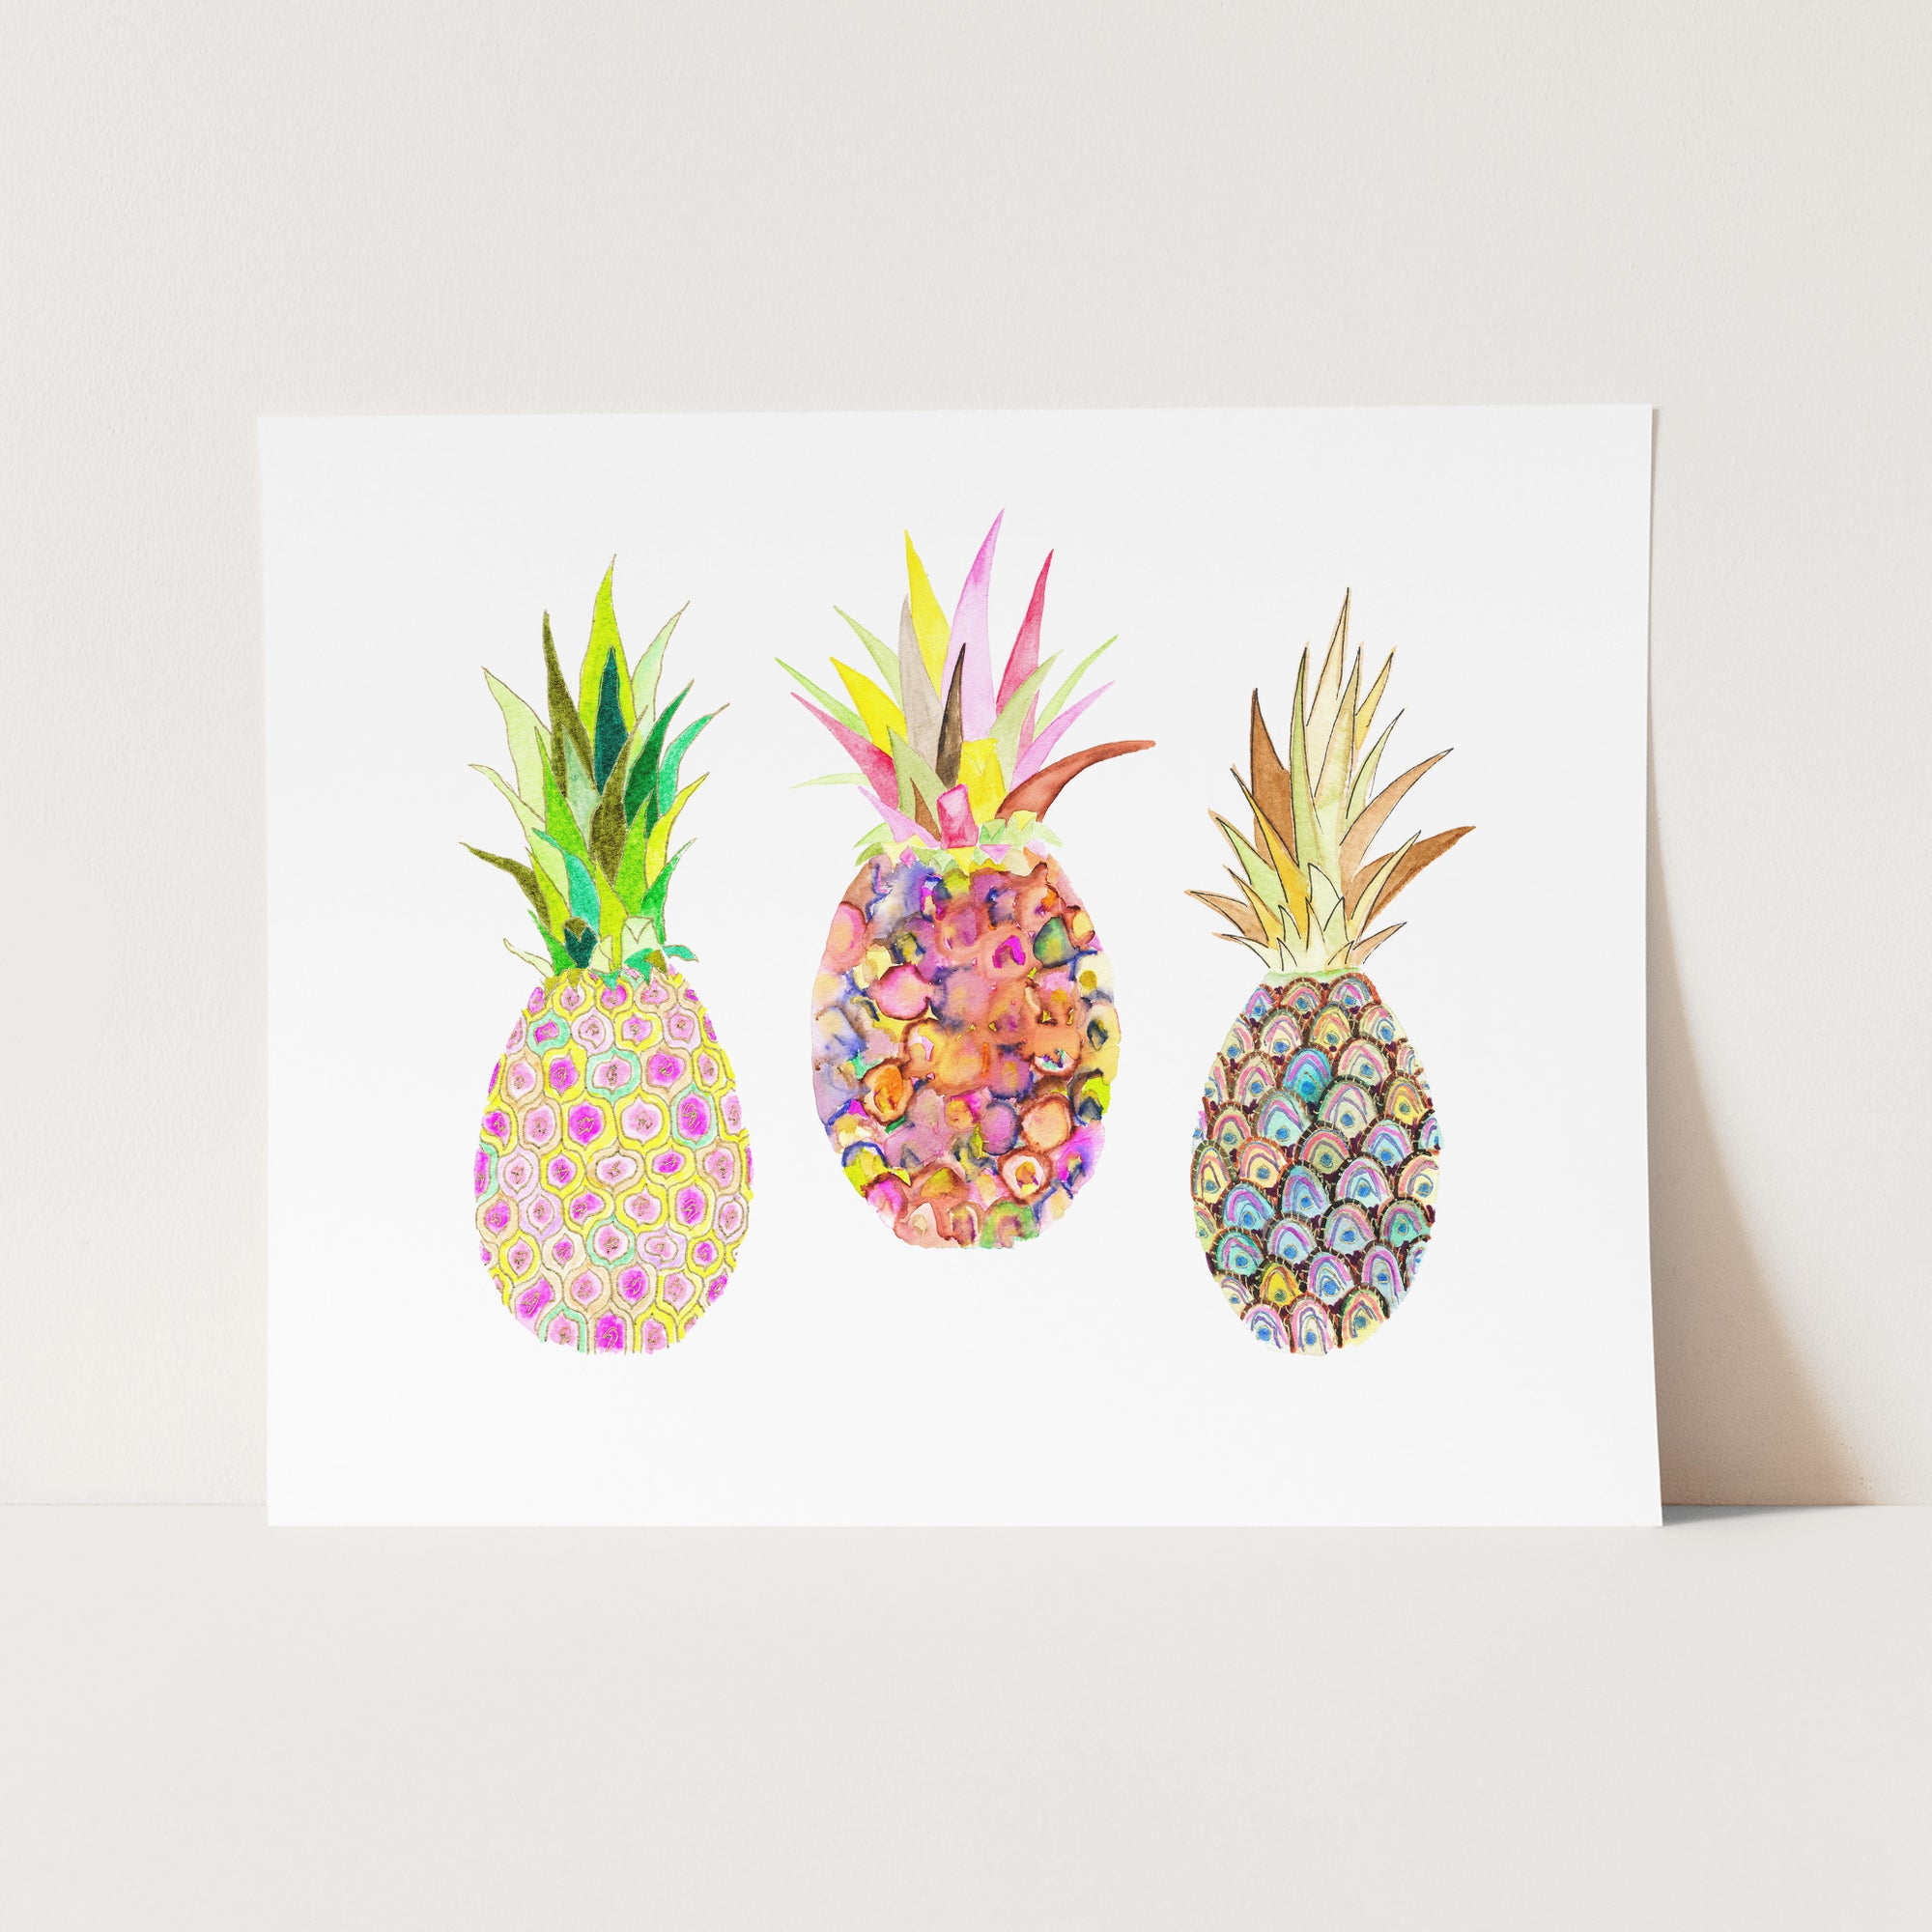 three pineapples are painted on a white card